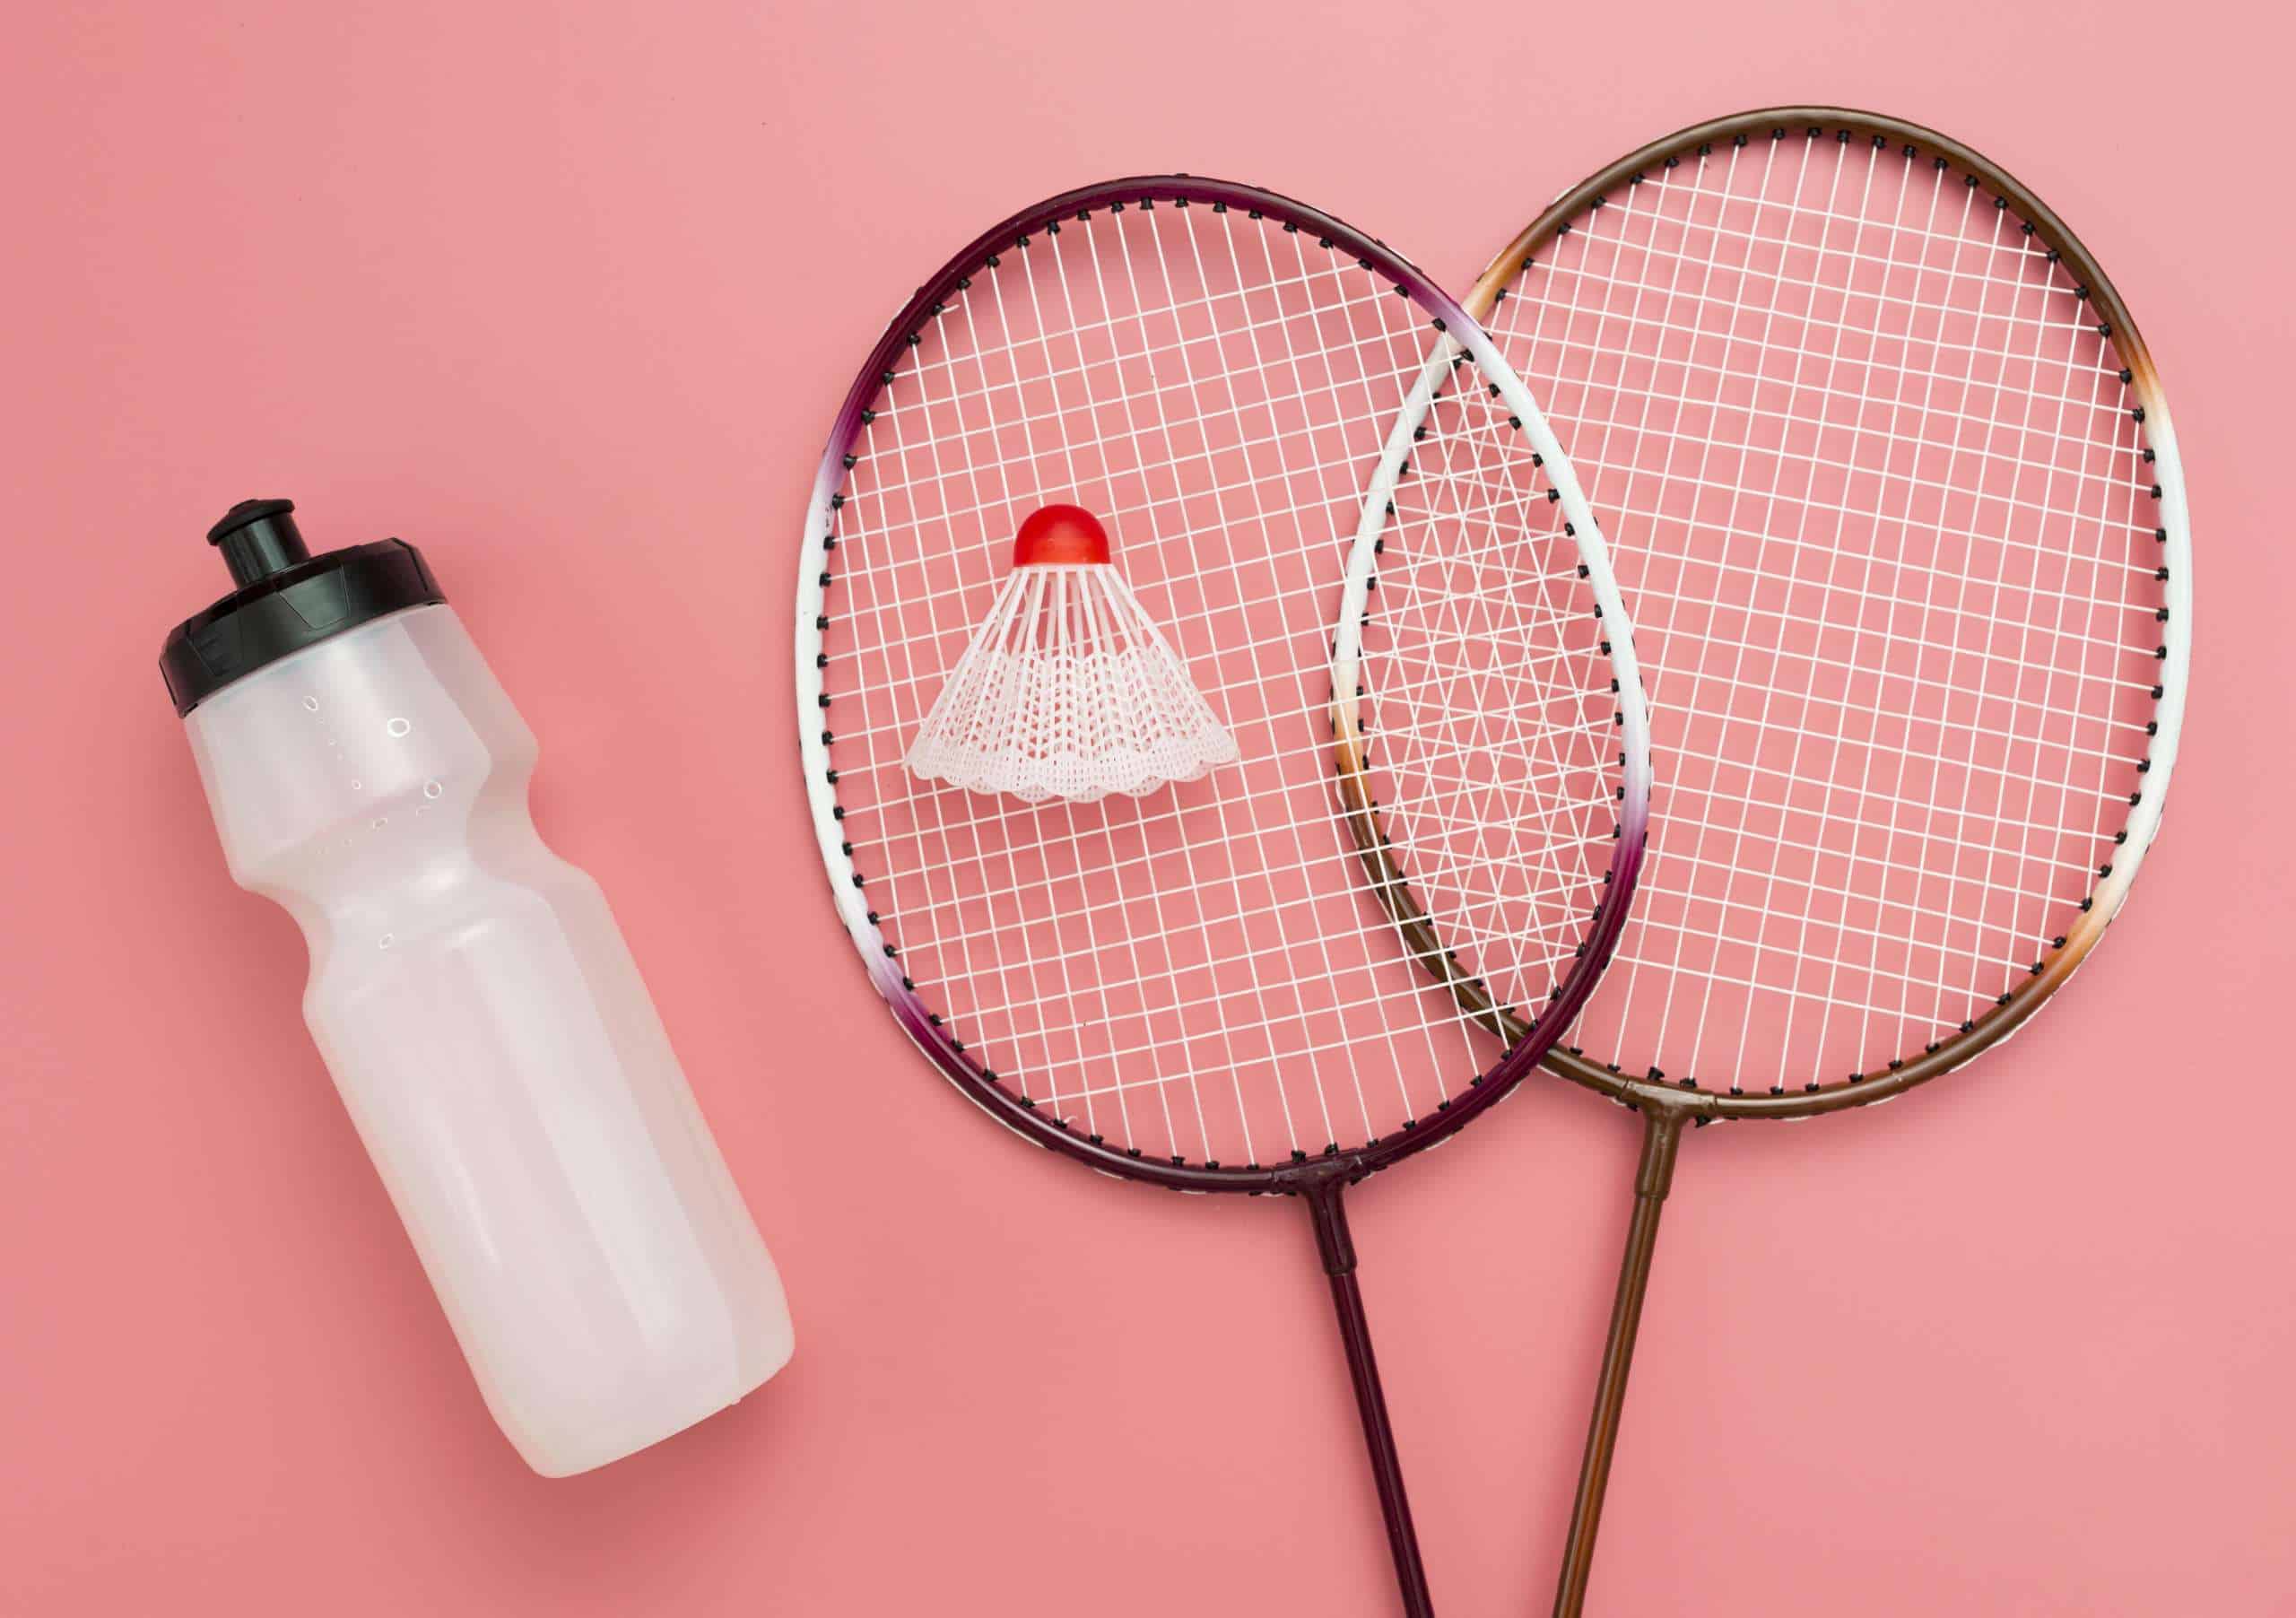 Family badminton set – what should you consider when choosing?